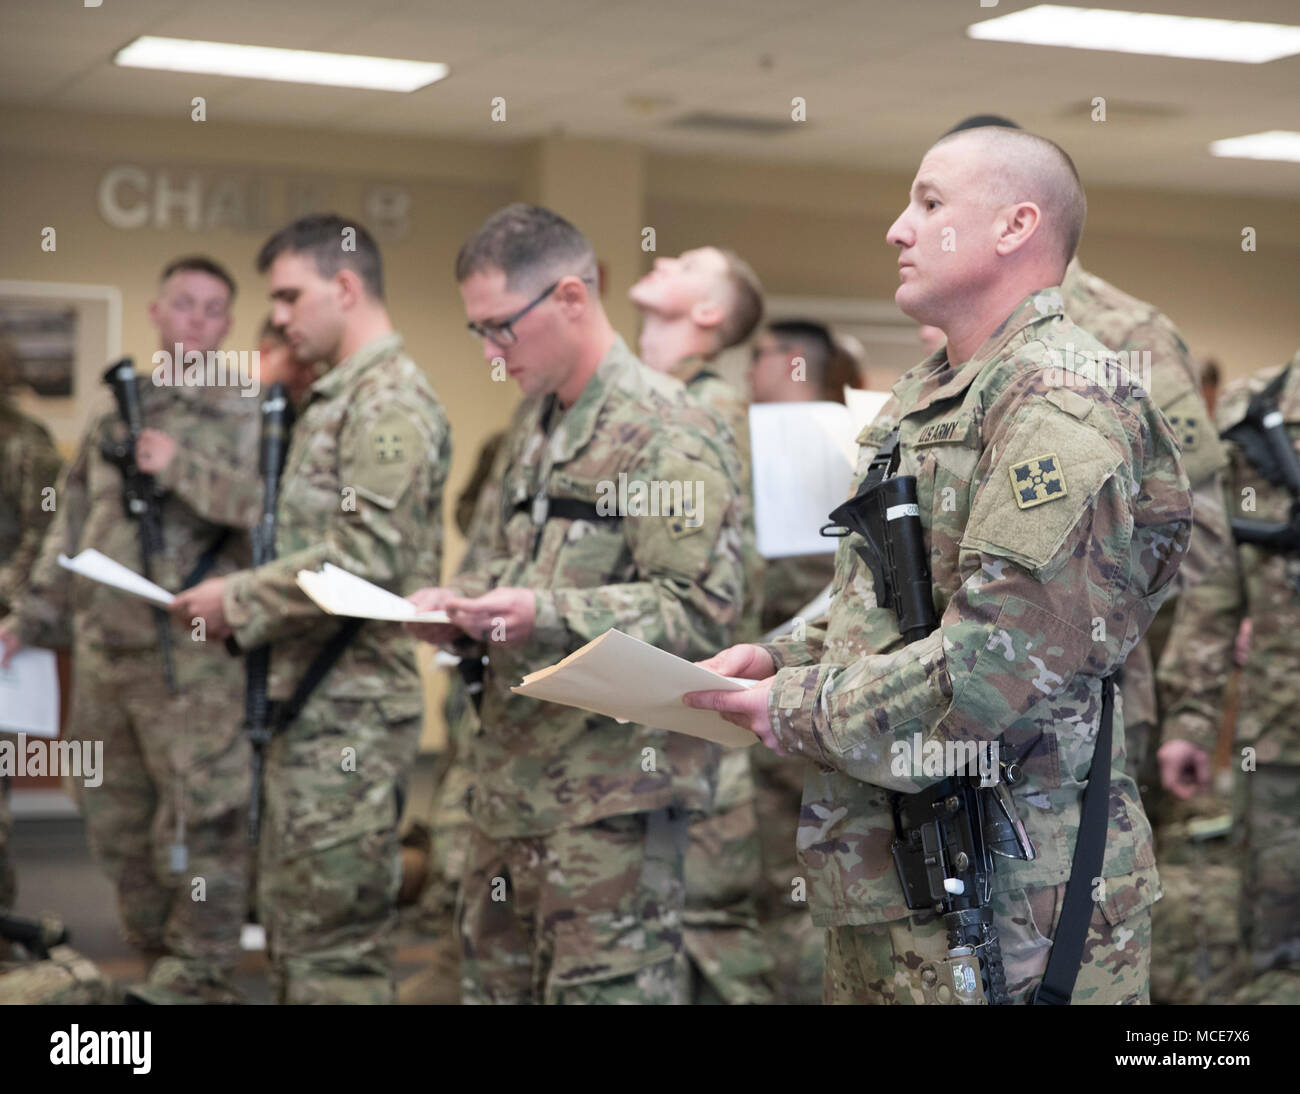 Soldiers from the 3rd Squadron, 61st Cavalry Regiment, 2nd Infantry Brigade Combat Team, 4th Infantry Division, wait in line for inspection, Feb. 19, 2018, before boarding an aircraft to depart Fort Carson, Colorado and begin their ten-month deployment to Kosovo. (U.S. Army photo by Staff Sgt. Neysa Canfield/ 2IBCT Public Affairs) Stock Photo